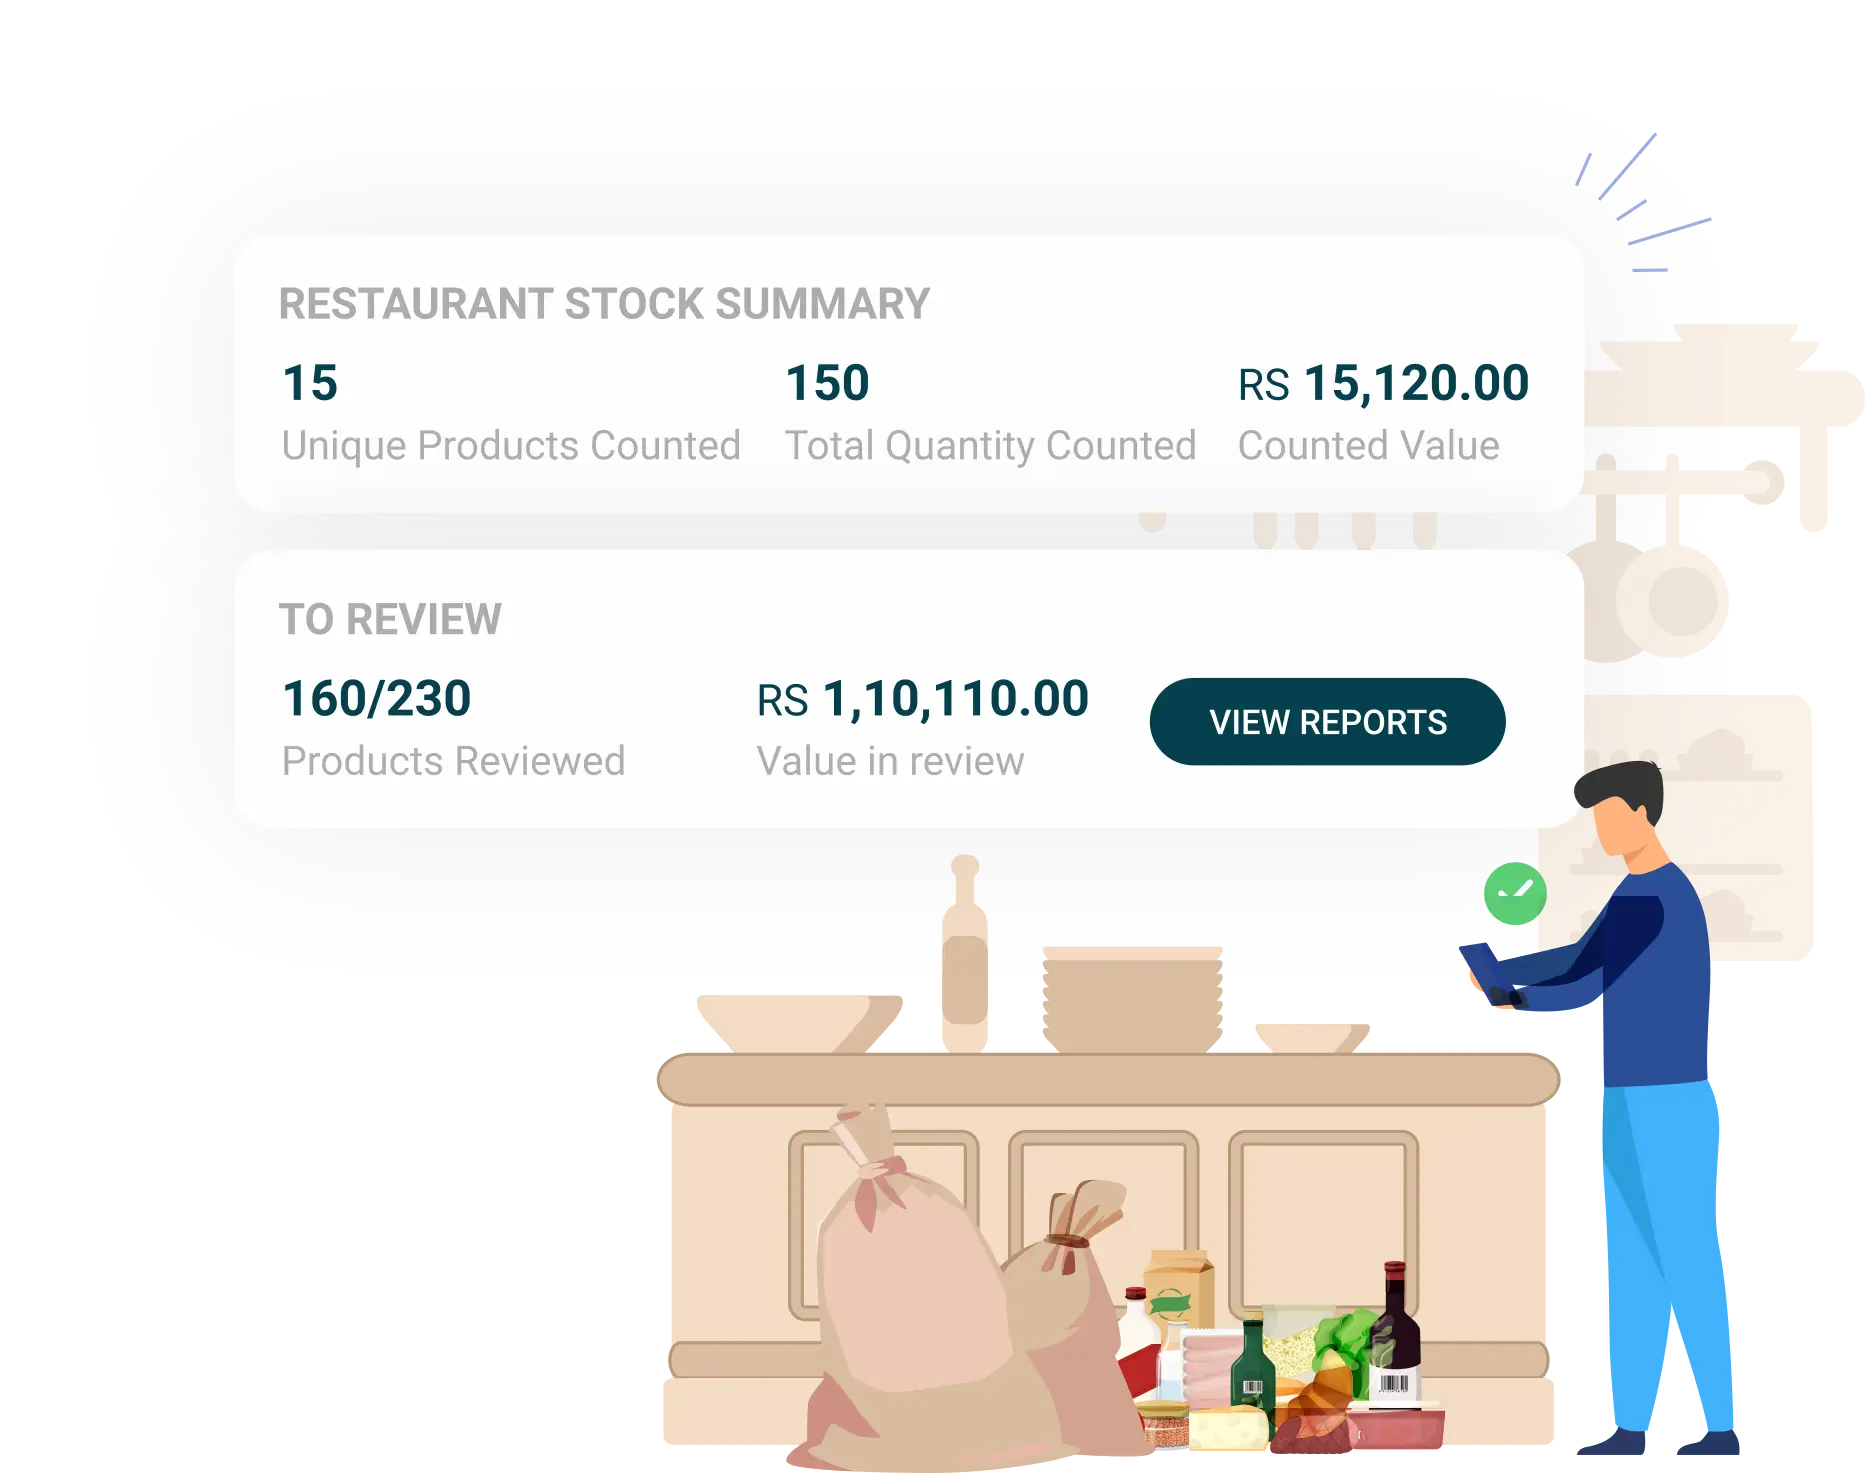 Restaurant employee stock management software for real-time tracking, ensuring ingredient freshness, cost savings, and waste reduction